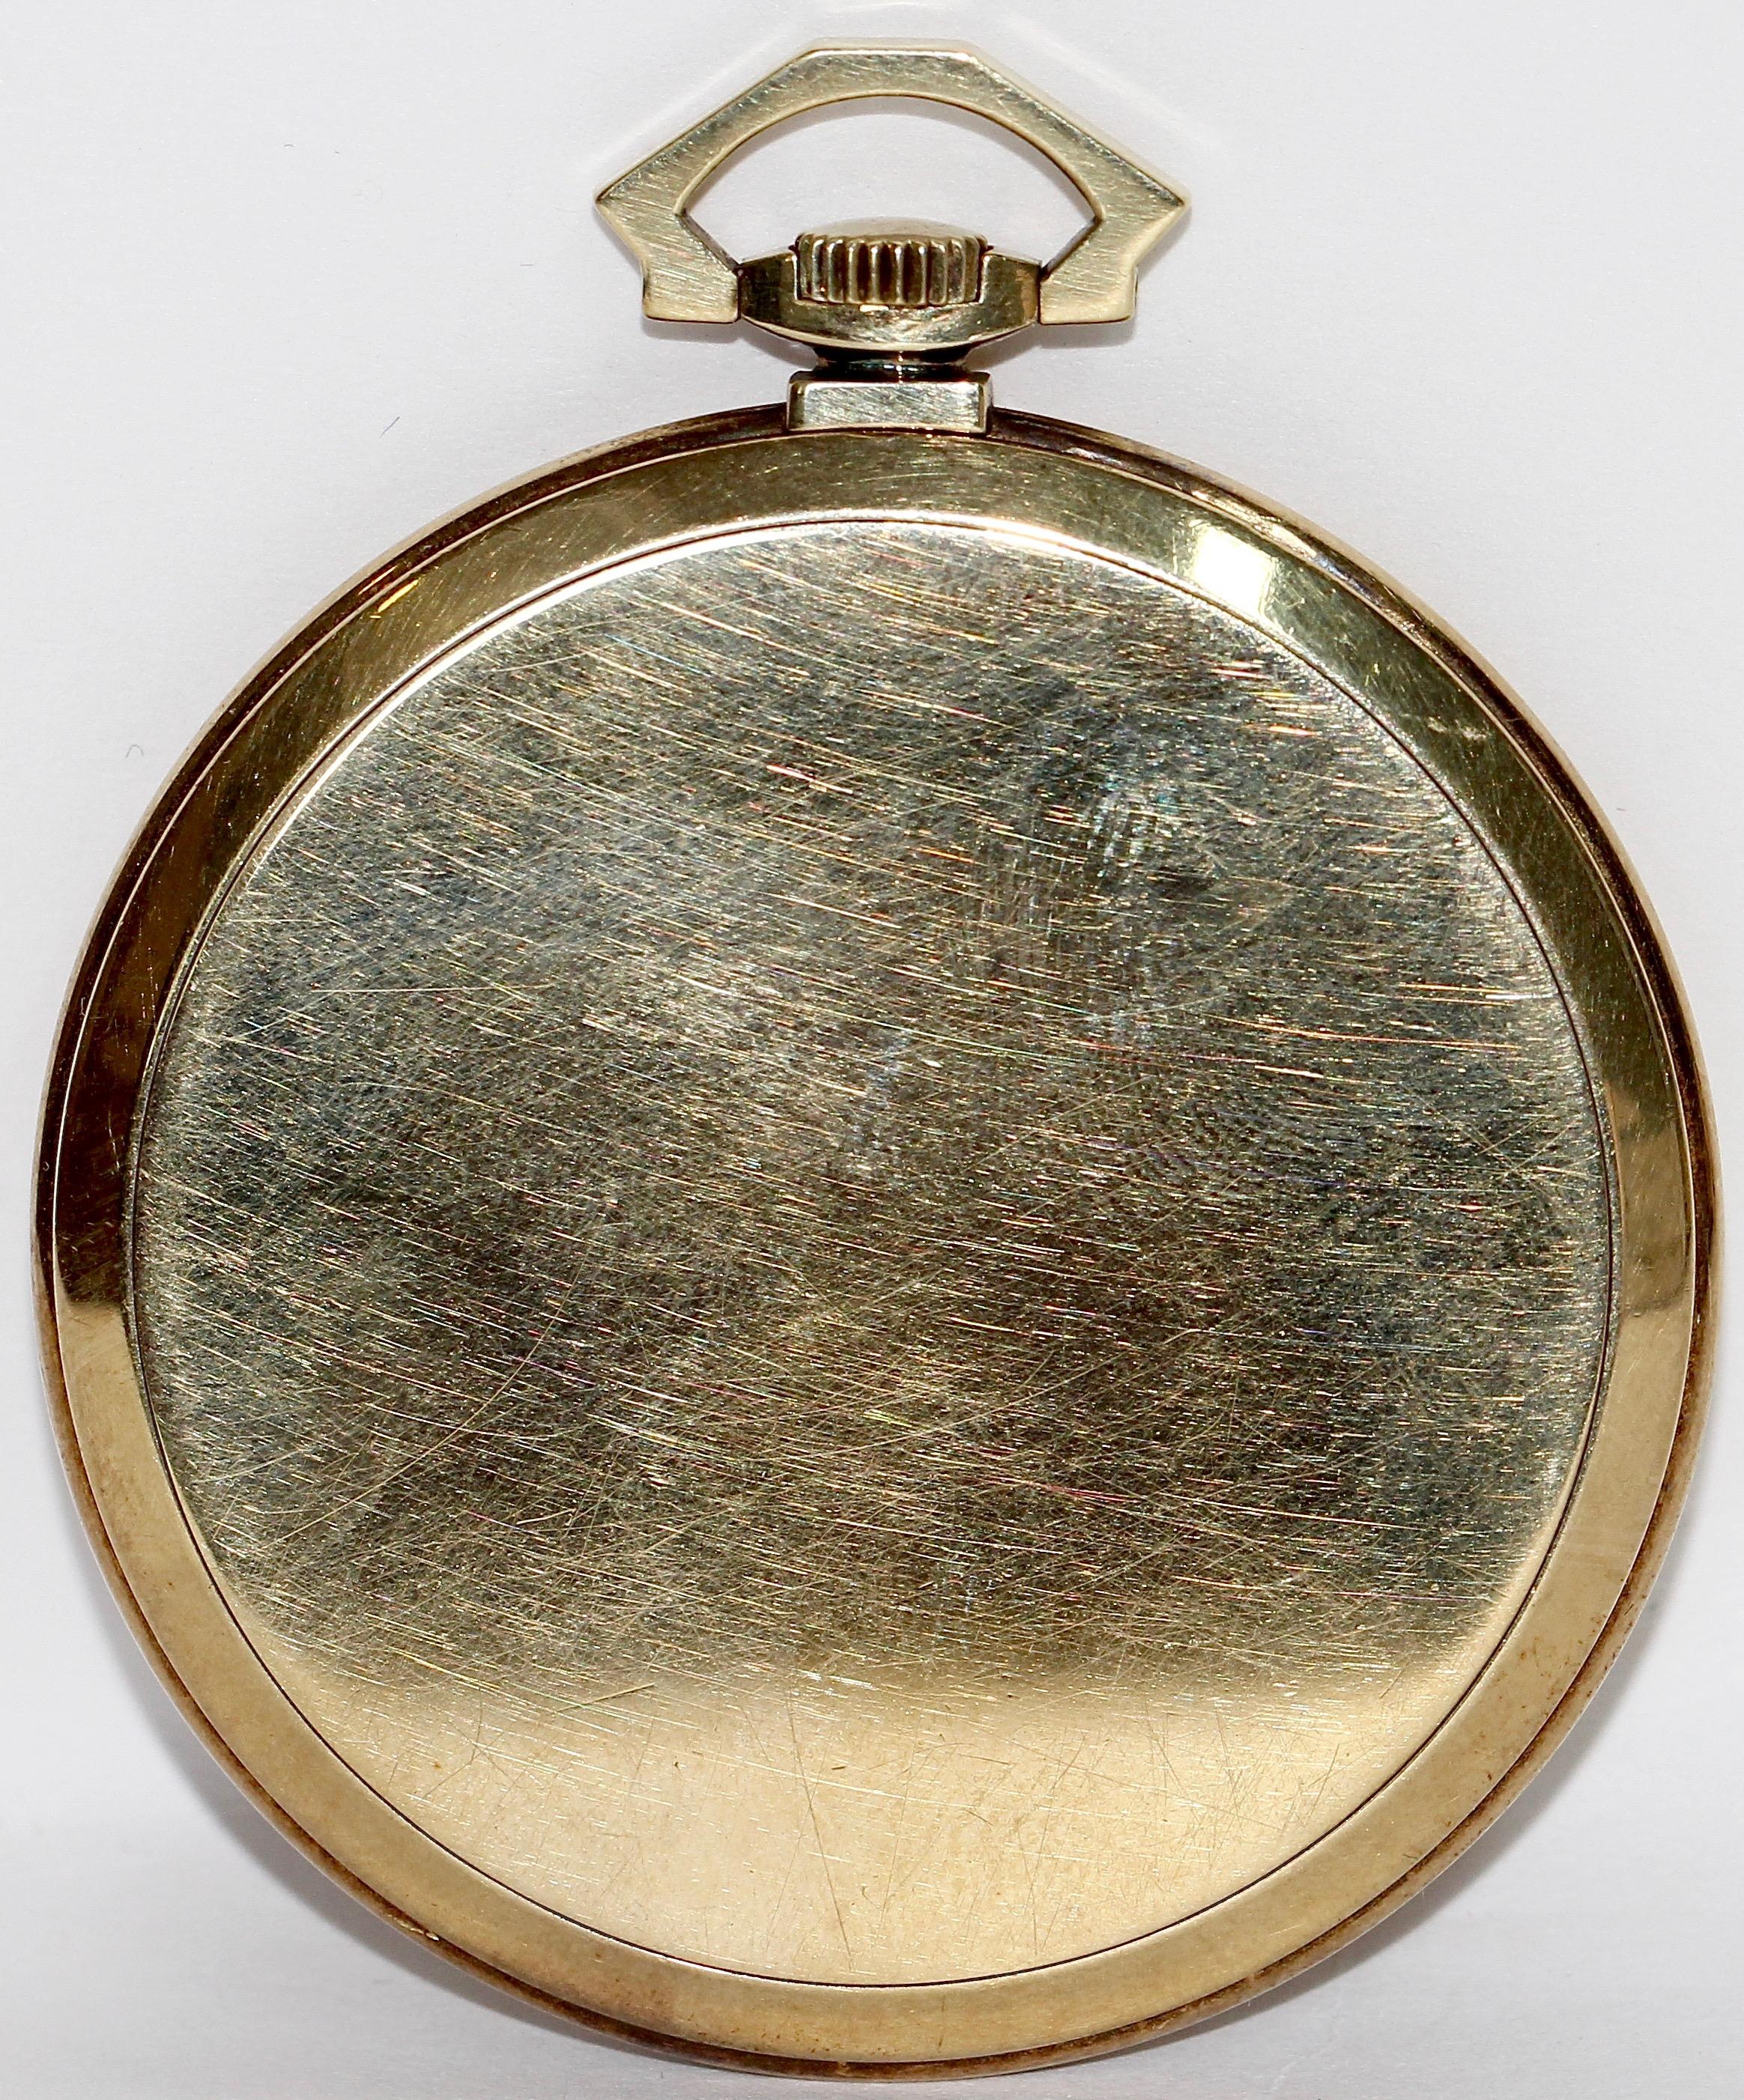 Beautiful IWC Art Deco pocket watch in 14k gold.

Diameter is without crown and eyelet.